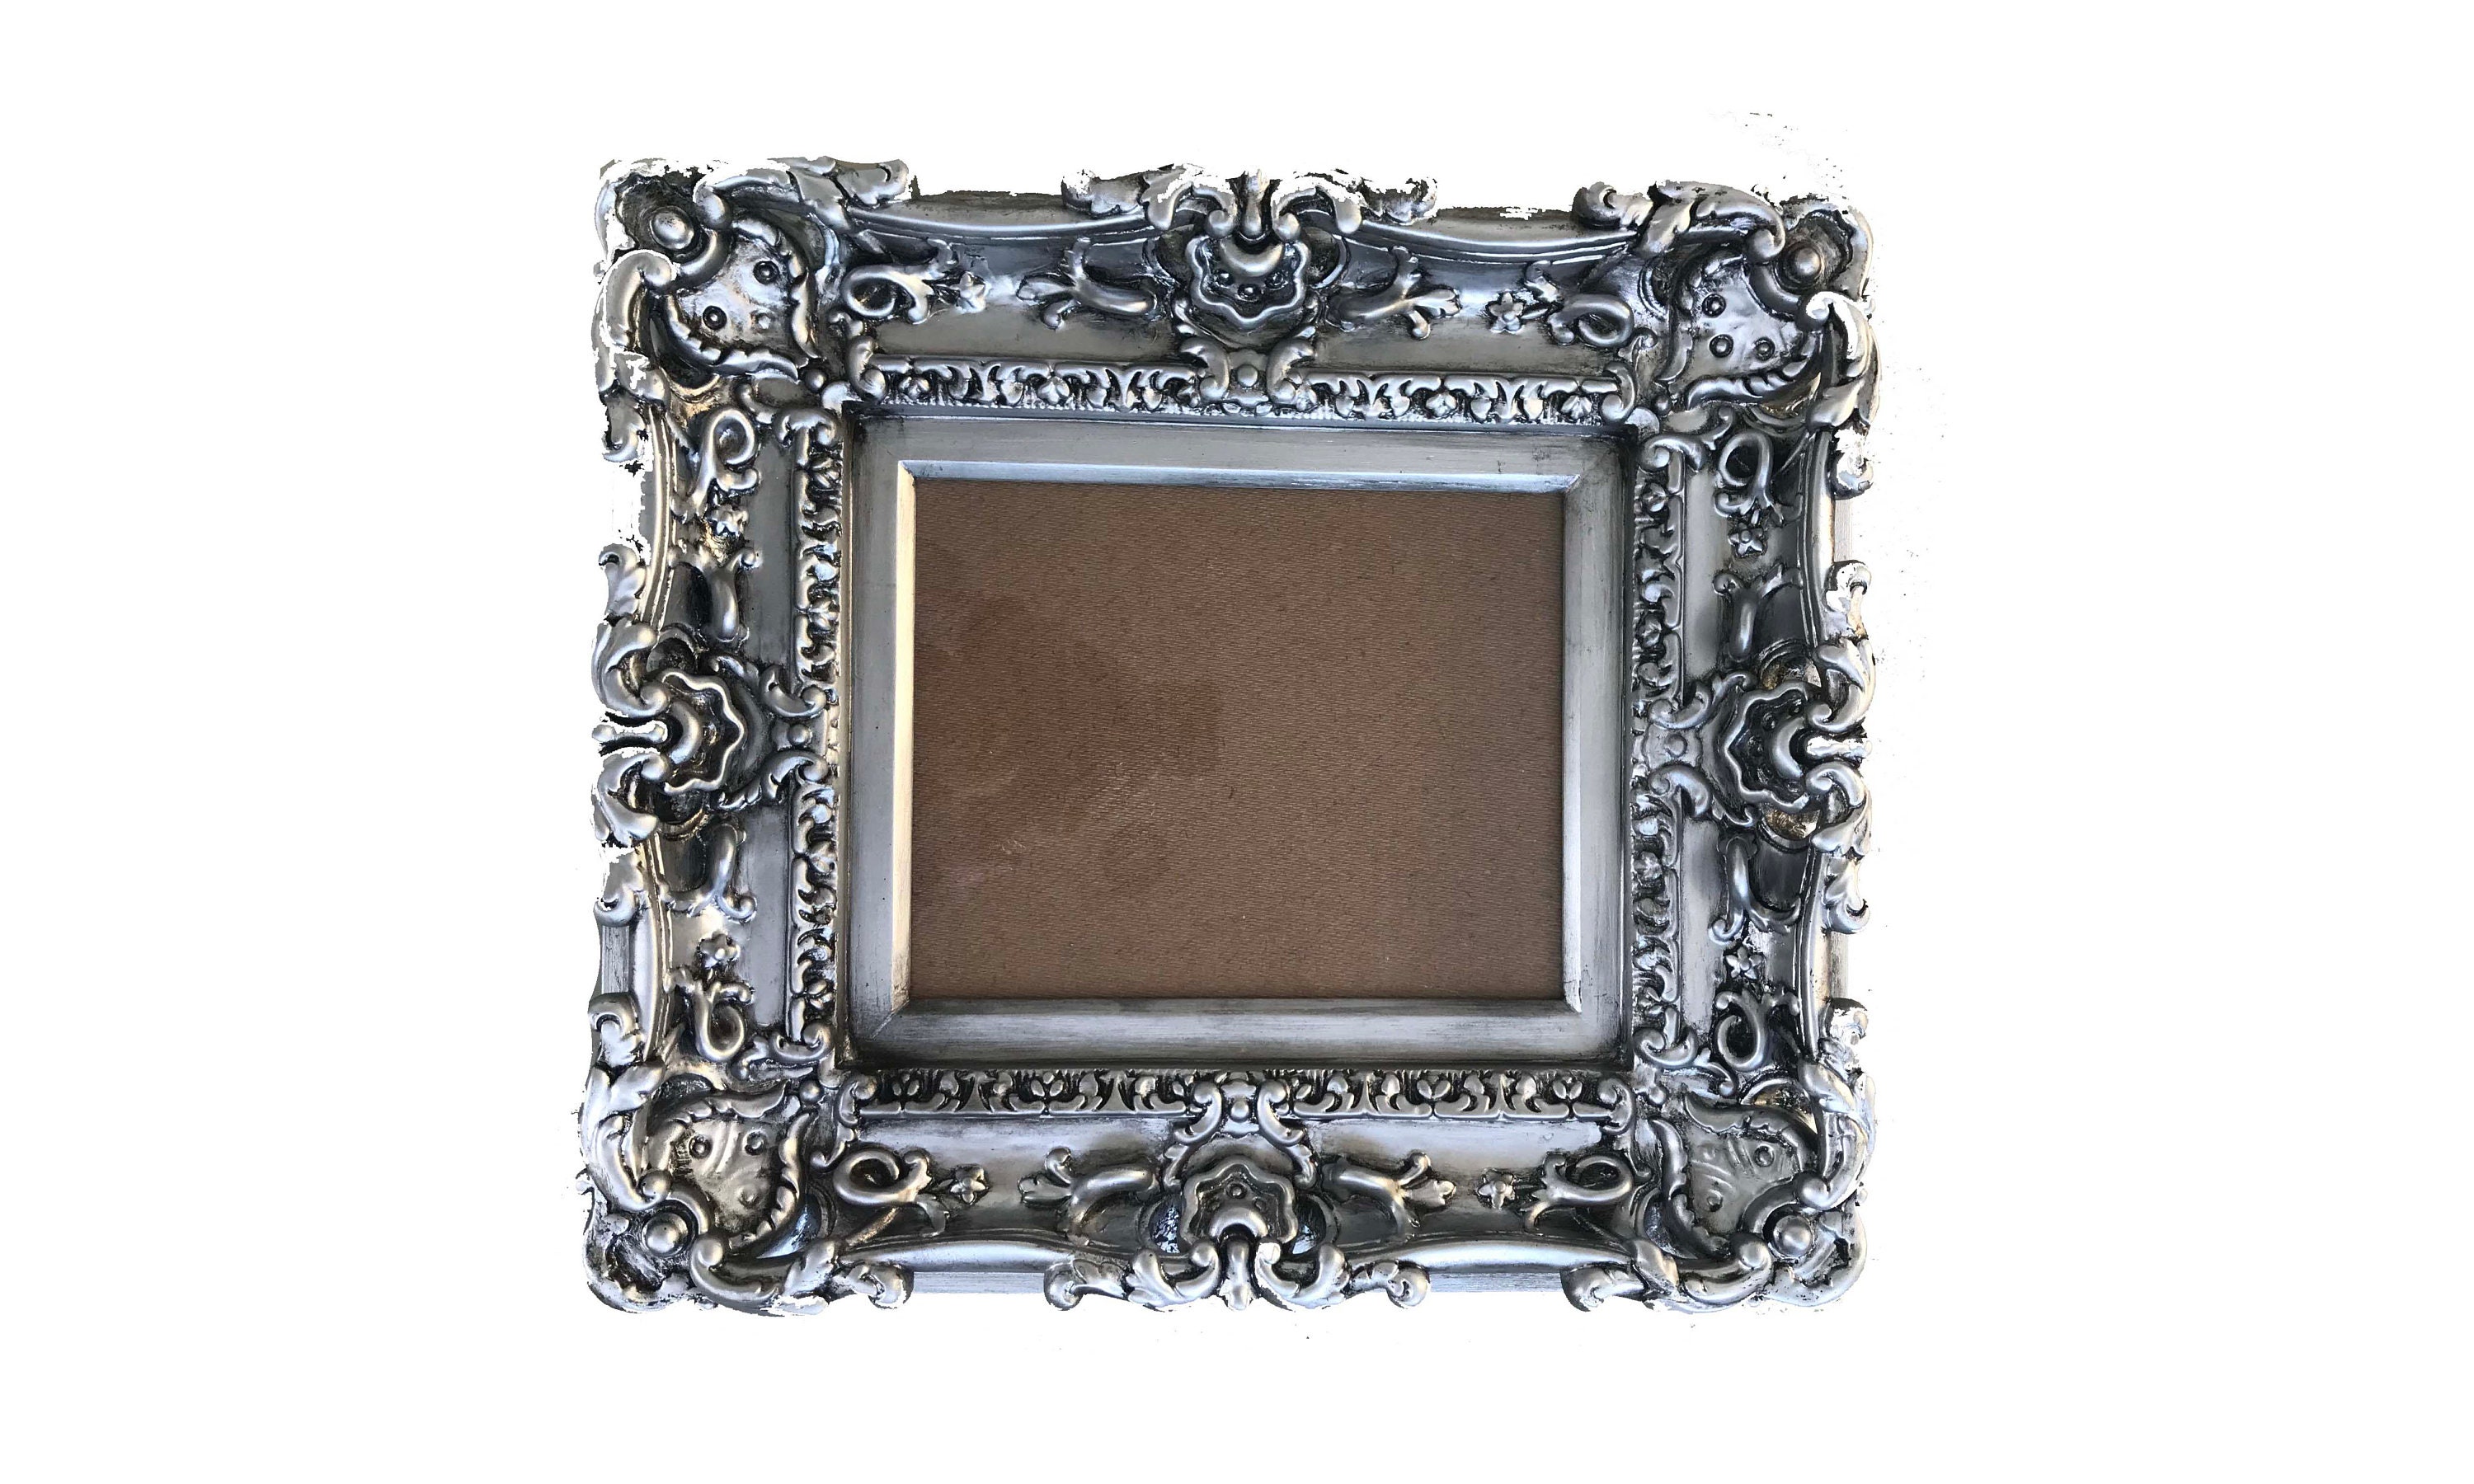 Set of 3 decorative storage books : 35,000 Baroque picture frame : 18,000  George home shimmer picture frame : 20,000